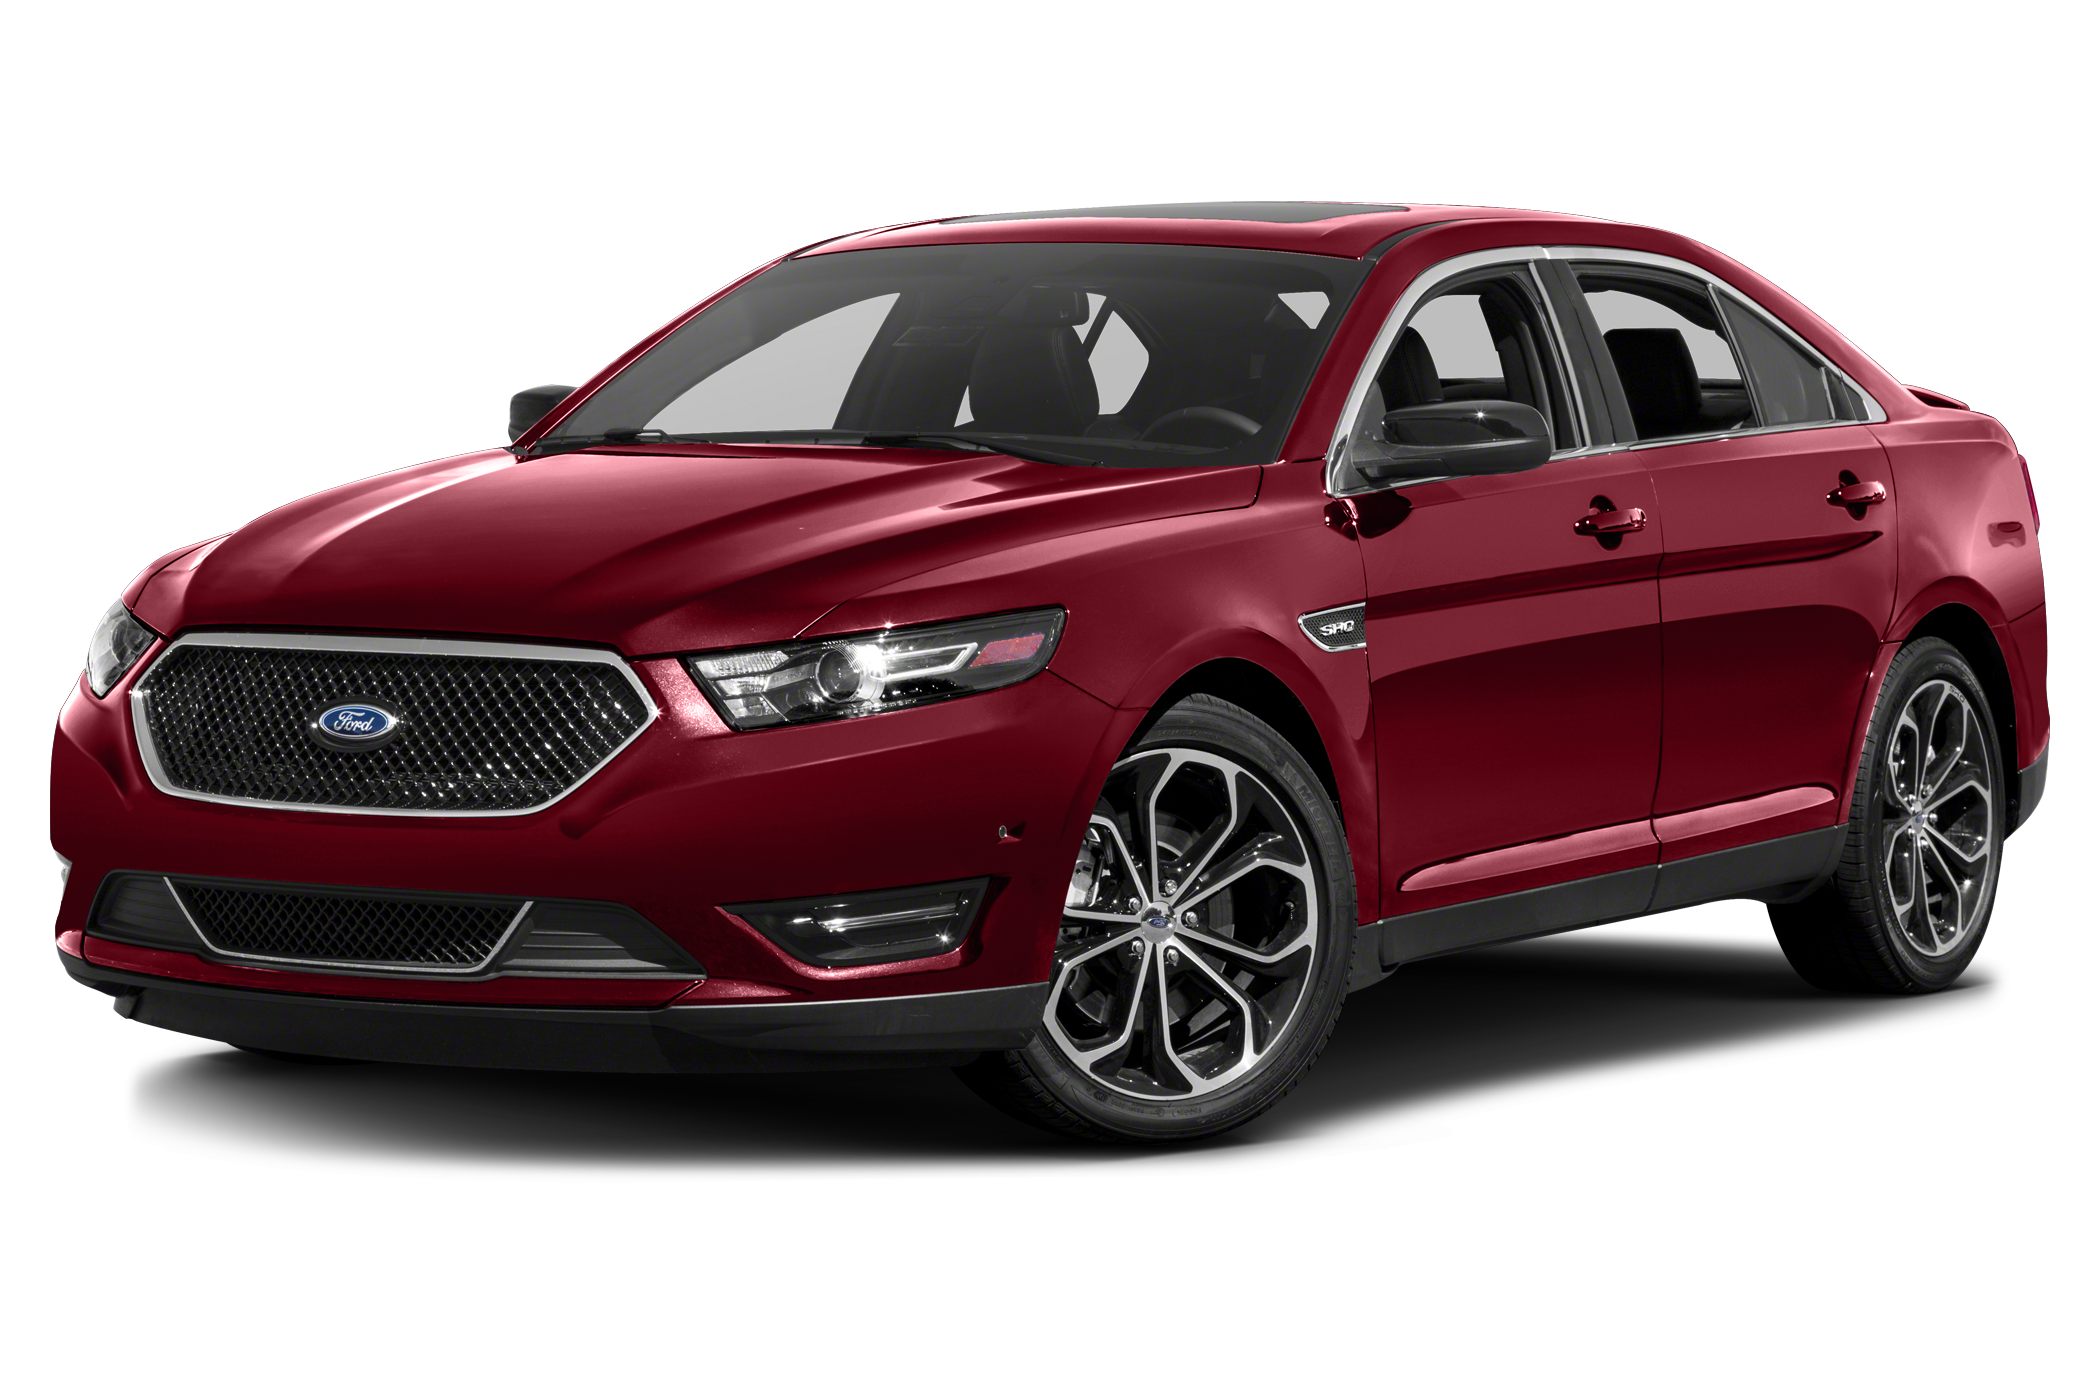 2015 Ford Taurus Sho 4dr All Wheel Drive Sedan Pictures